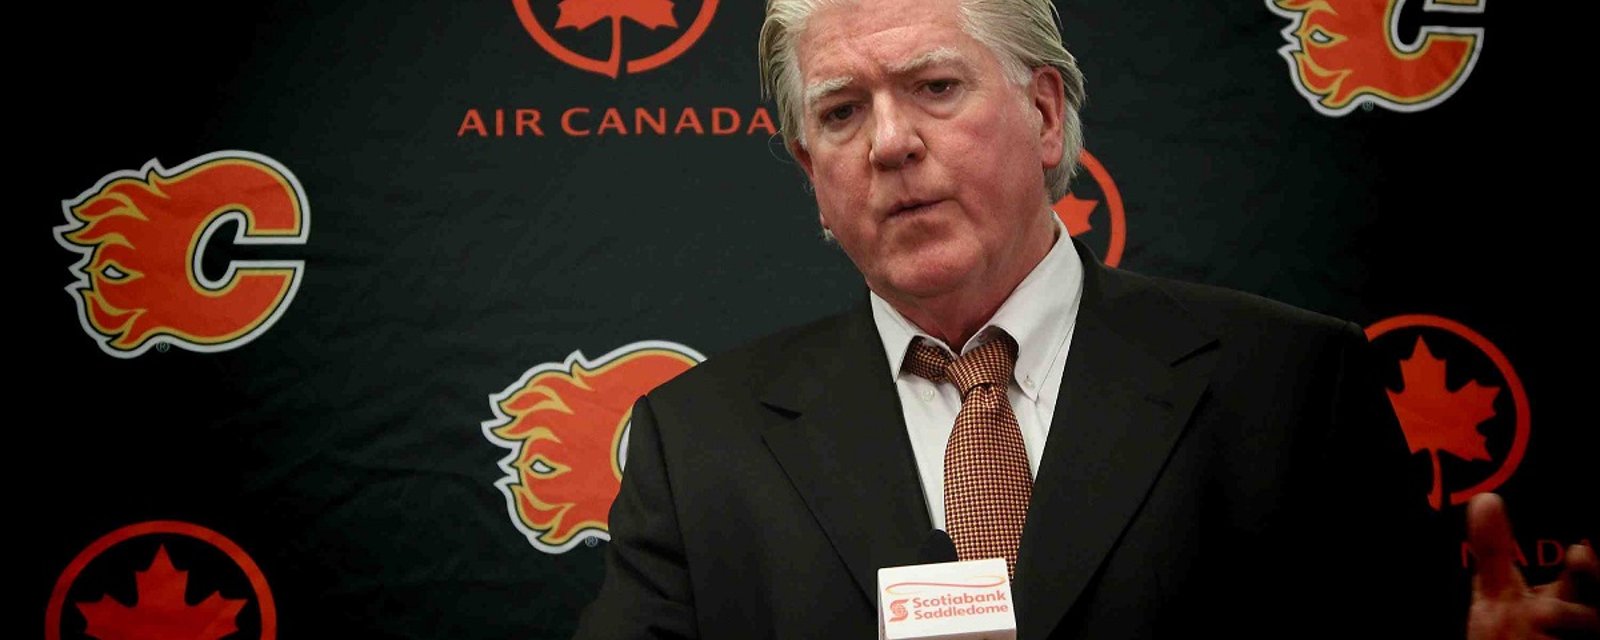 Flames respond after controversial comments from Brian Burke today.